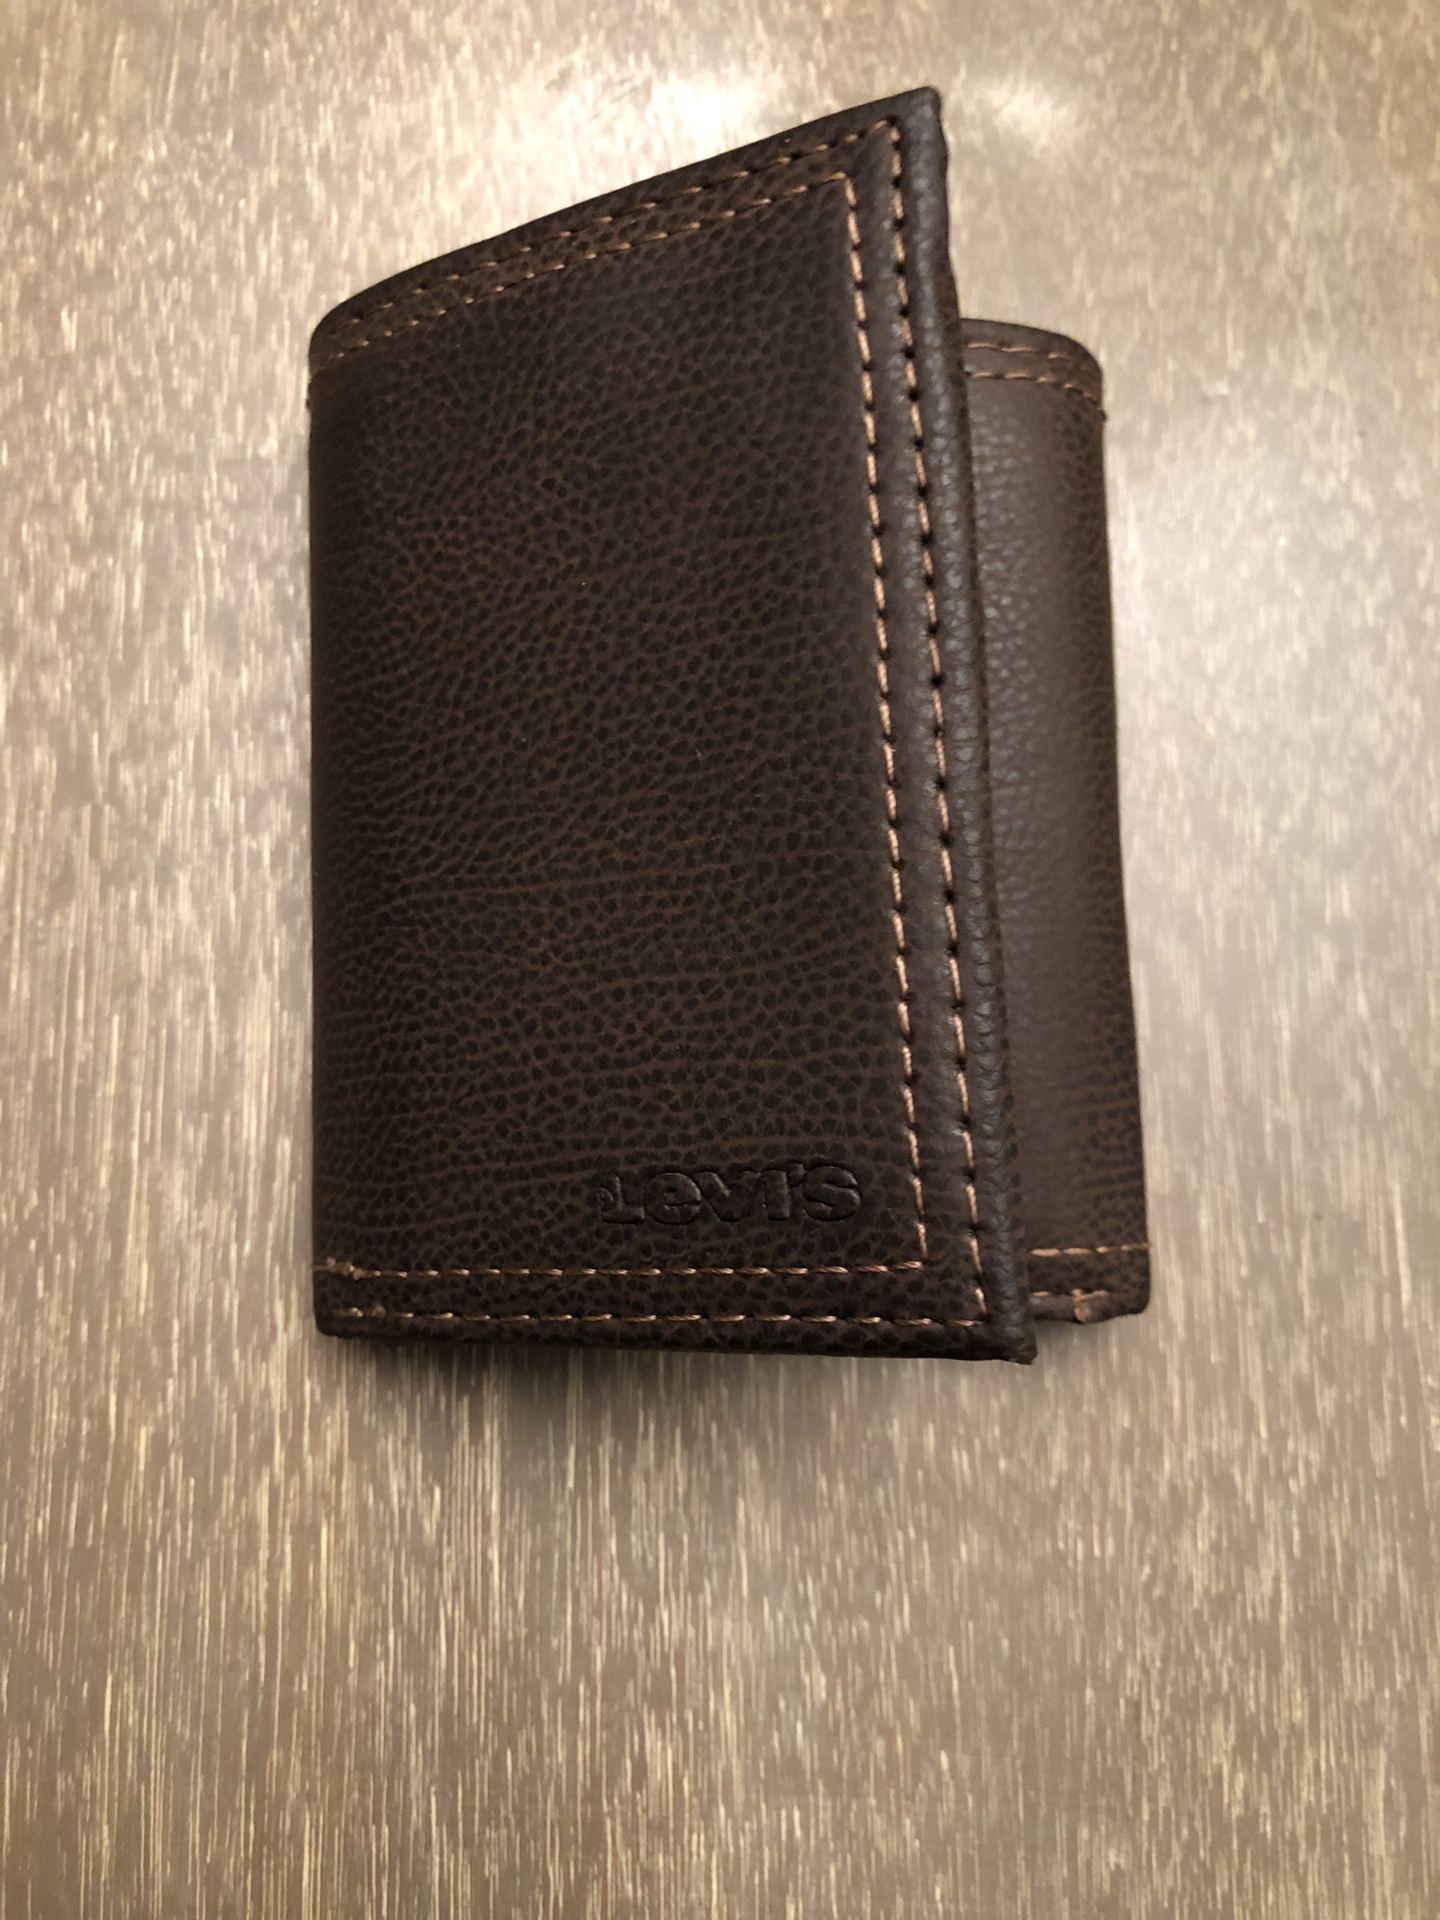 Levi’s leather wallet